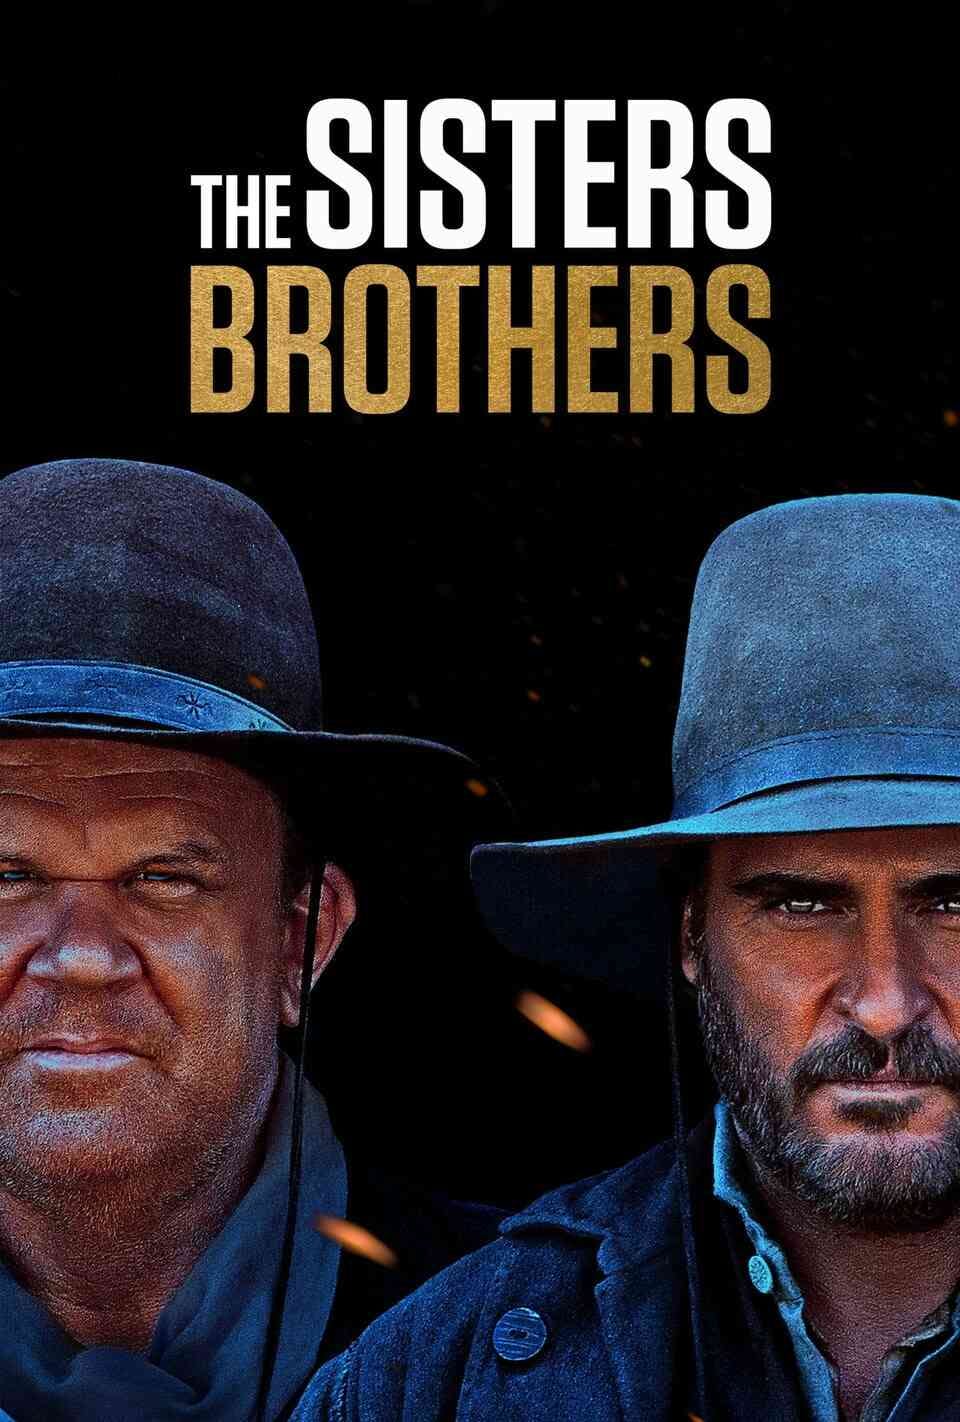 Read The Sisters Brothers screenplay (poster)